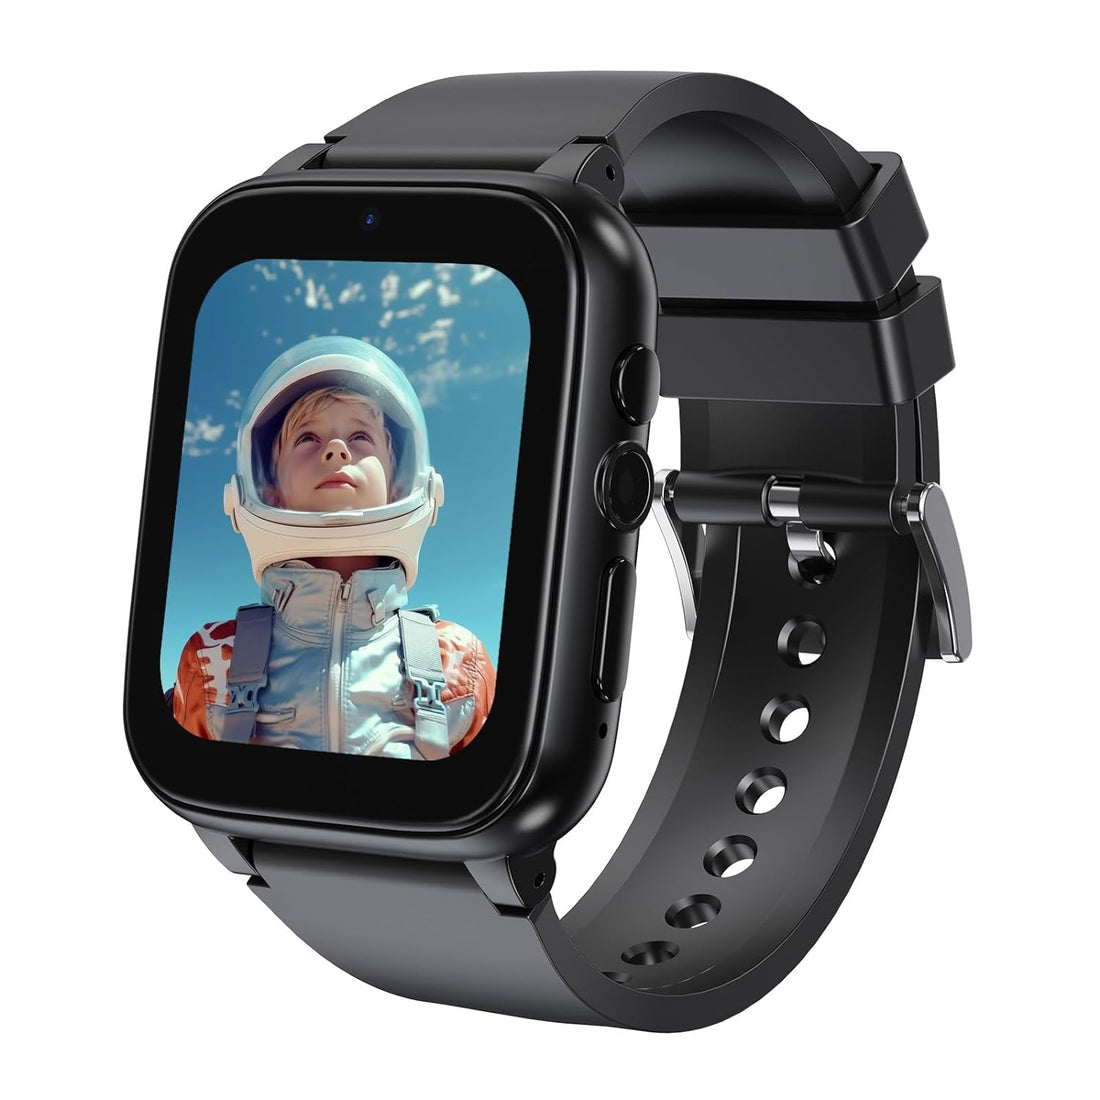 iCHOMKE Smart Watch for Kids, Girls Boys Smartwatch with 26 Games Camera Video Recorder and Player, Pedometer Calendar Flashlight, Audio Book etc., Gifts for 4-12 Years Children (Black)